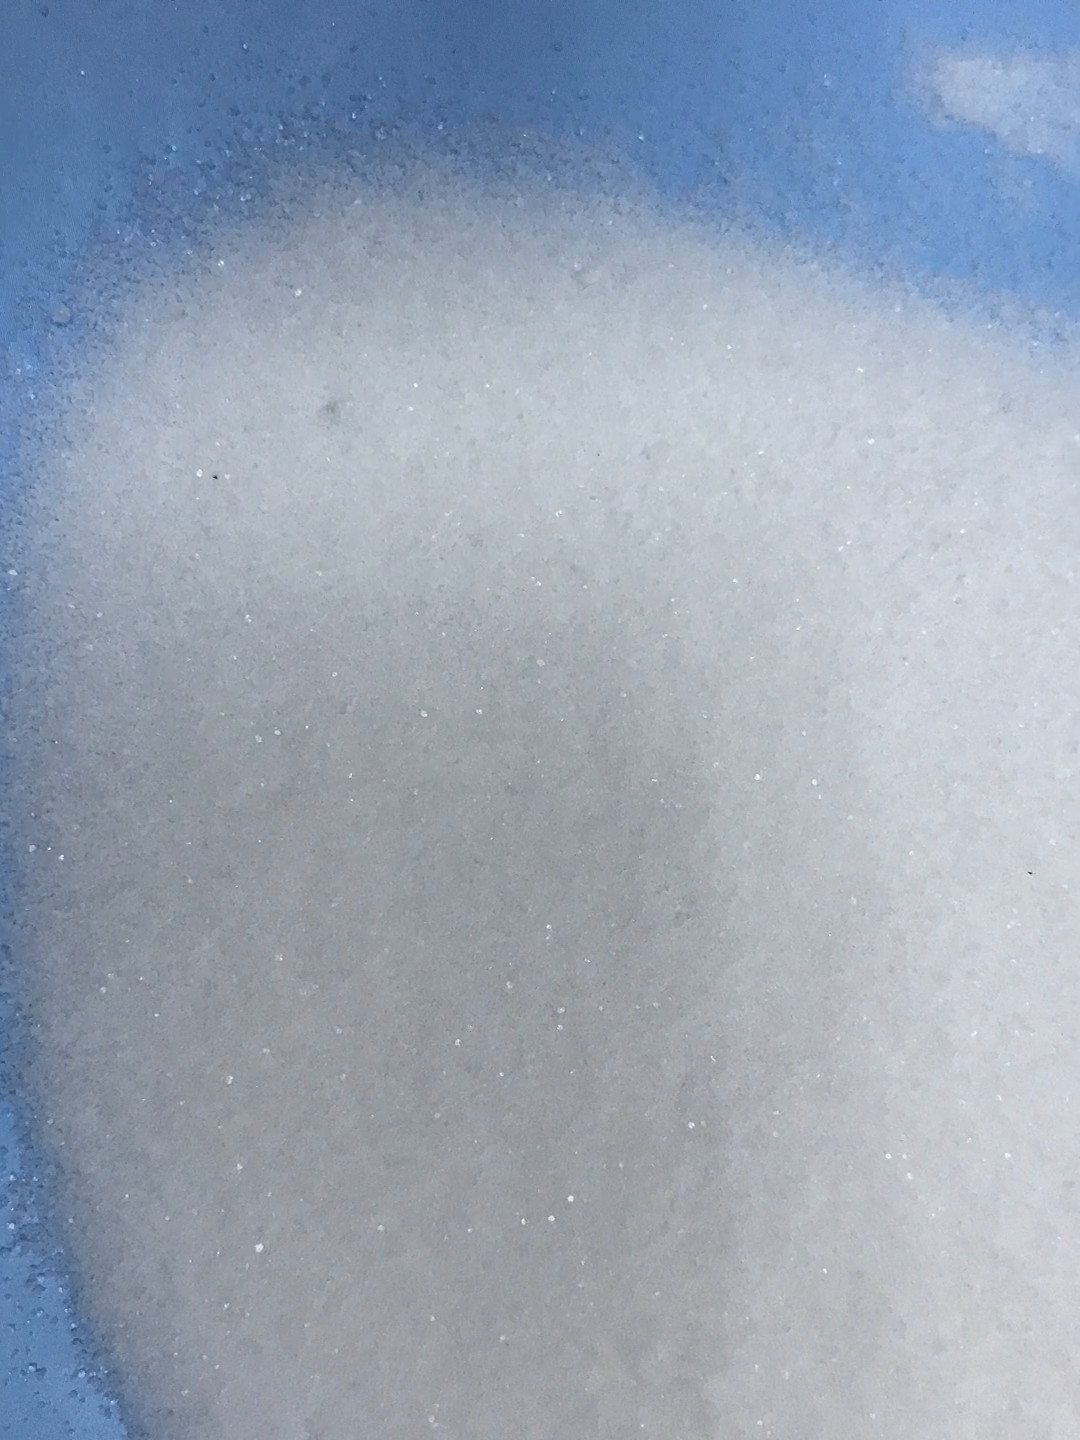  Colorless Crystal Pentahydrate Boric Oxide CAS 12179-04-3 Manufactures